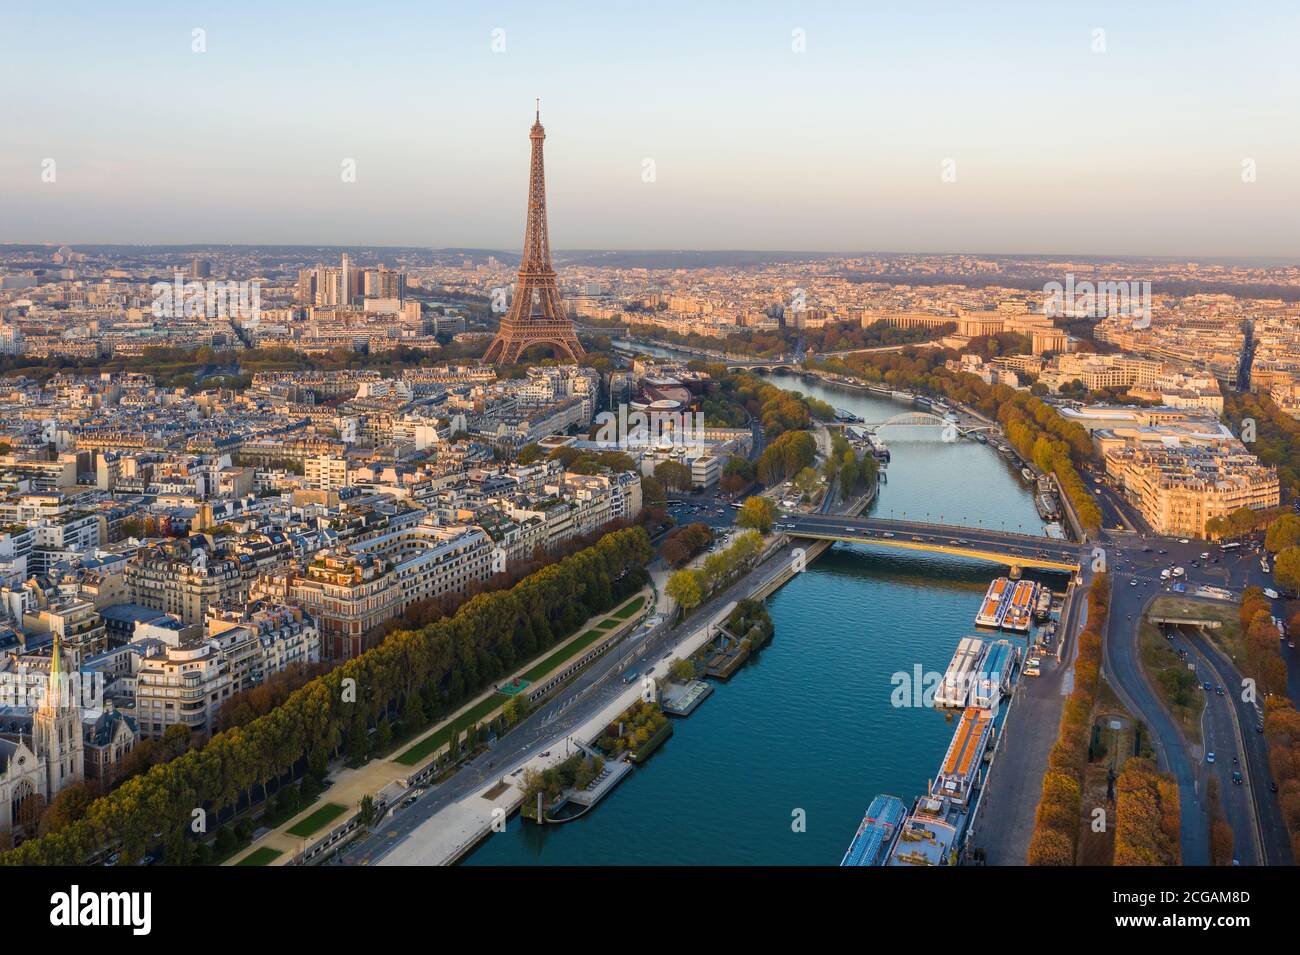 Over Paris France Europe Aerial Eiffel Tower Landmark Tourism and Seine River Fall Colors Stock Photo